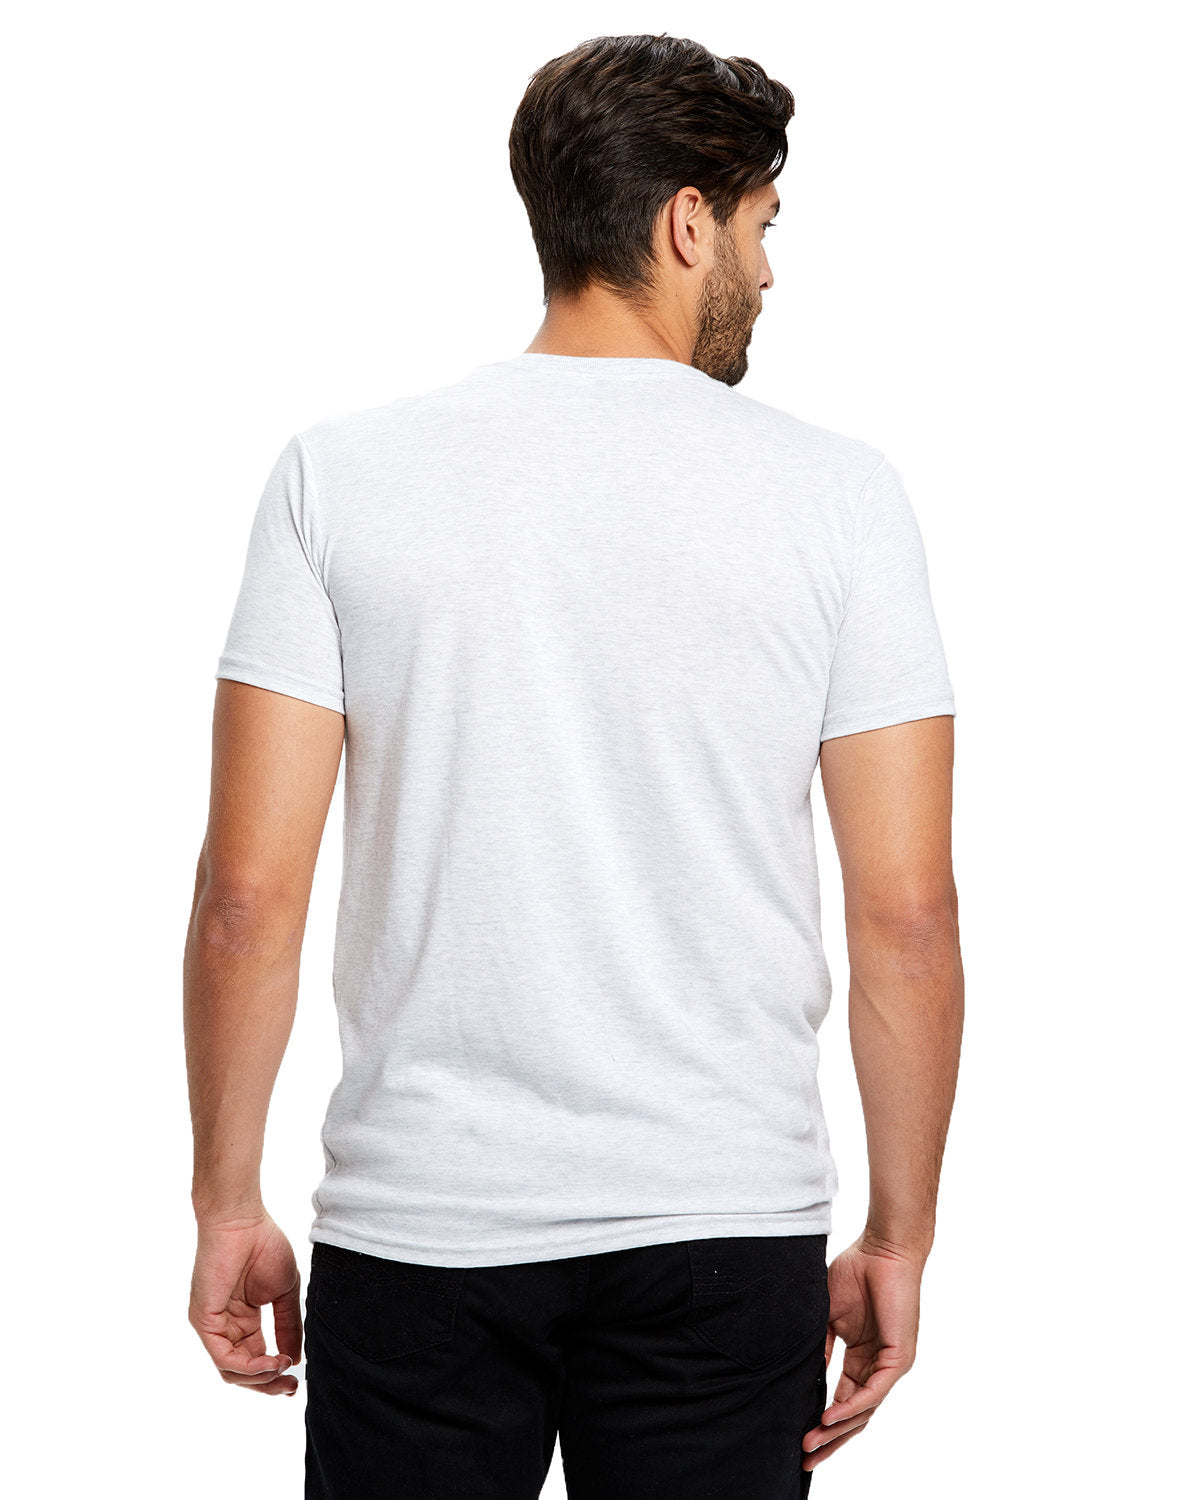 Jersey T Shirts, Mens Wholesale Clothing